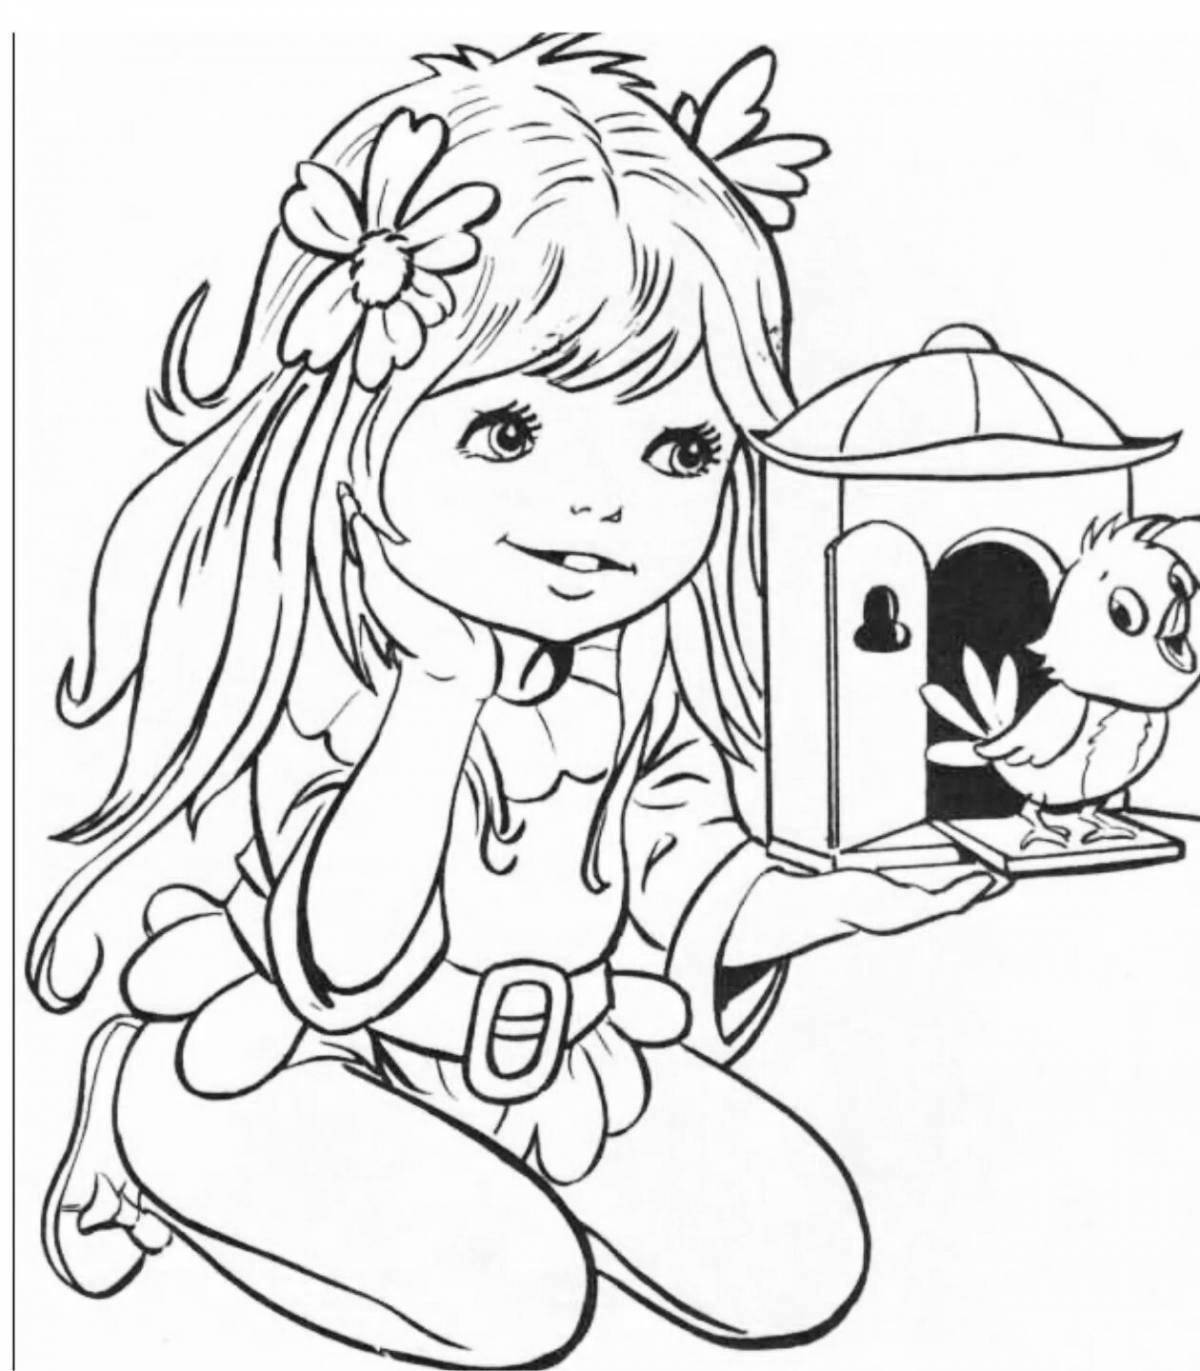 Fun coloring book for girls 6-7 years old